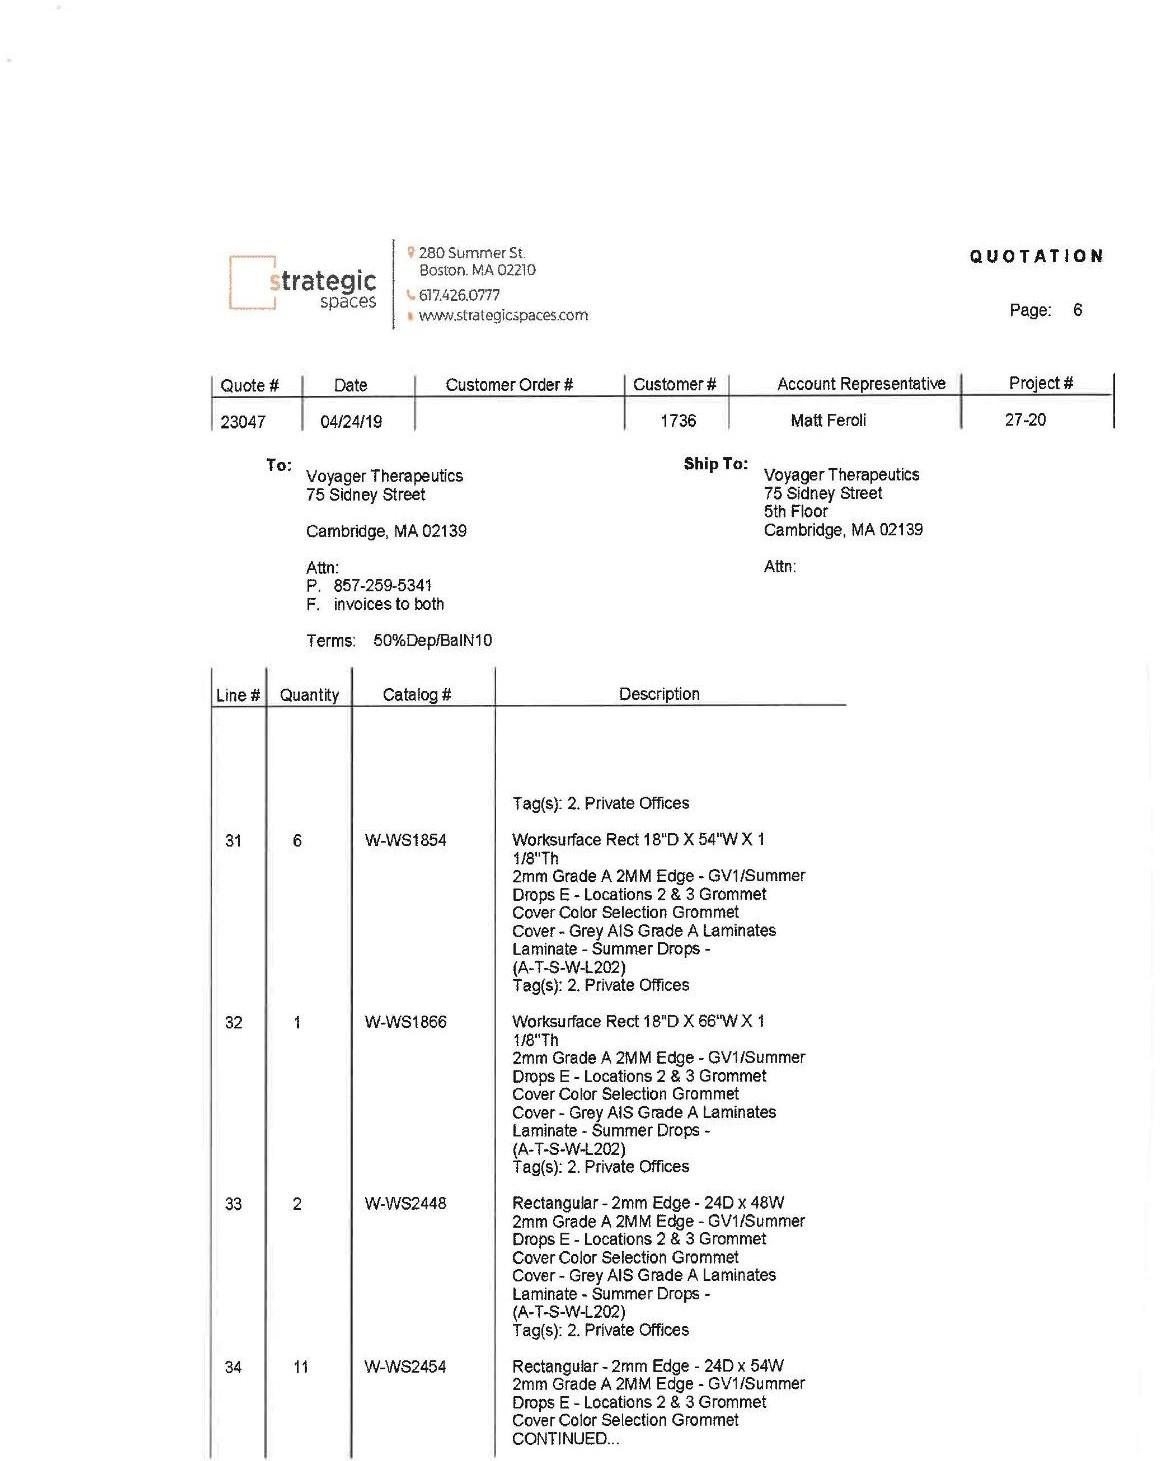 Ex C to Voyager BioNTech Sublease Agreement_Page_06